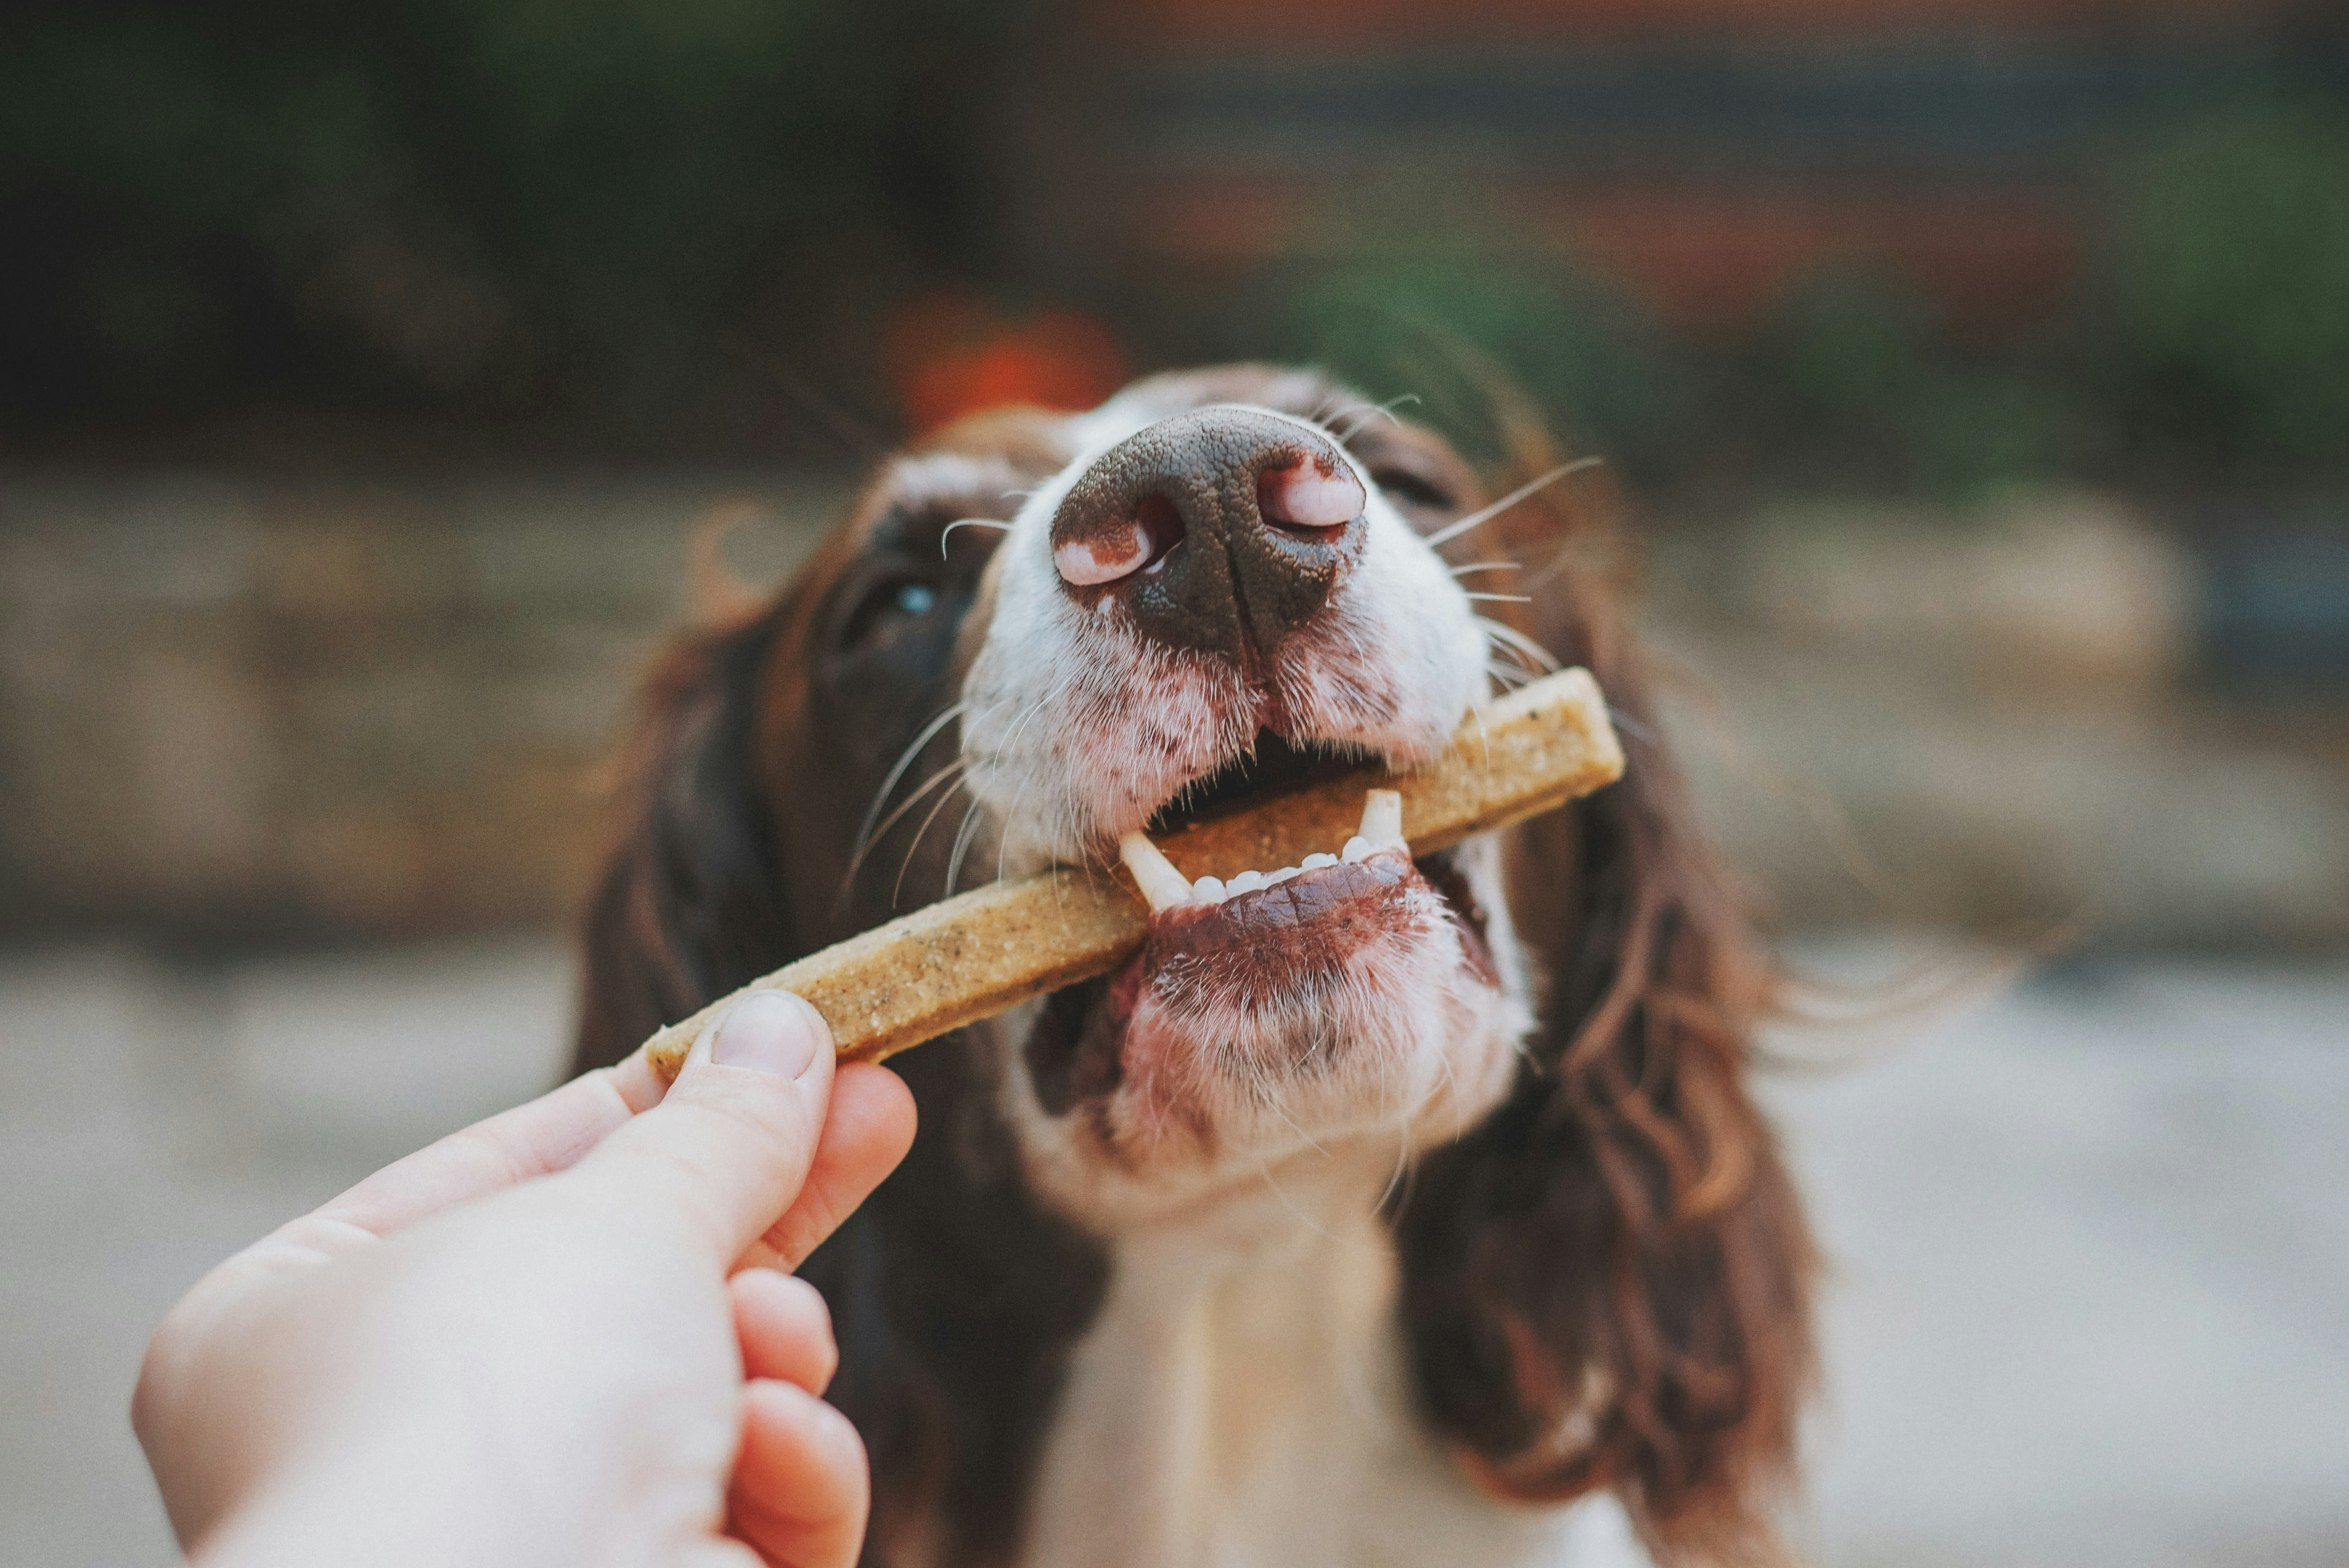 A Cocker Spaniel takes a dog treat from their owner.